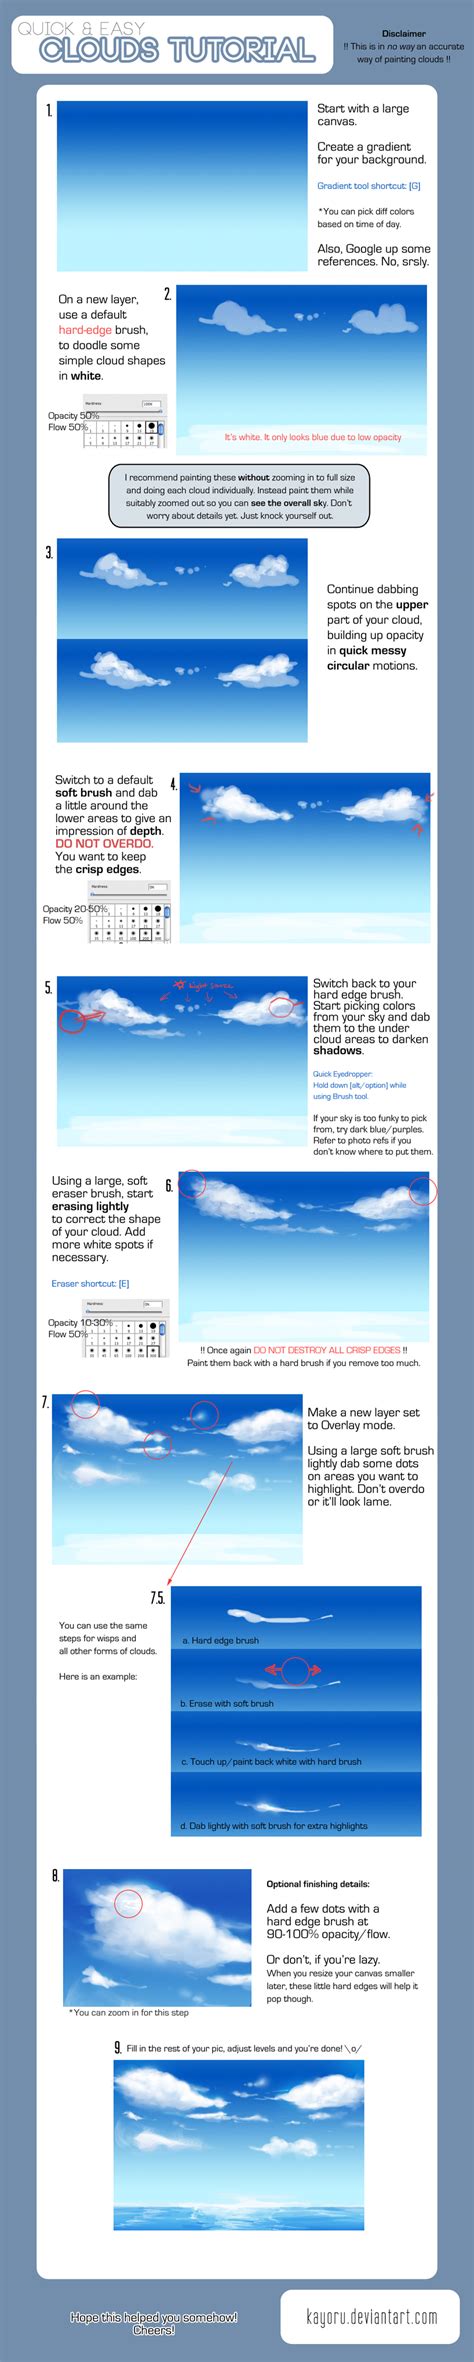 Clouds are visible mass of water that look like a collection of white smoke floating in the sky. Quick and Easy Cloud Tutorial by kayoru on DeviantArt